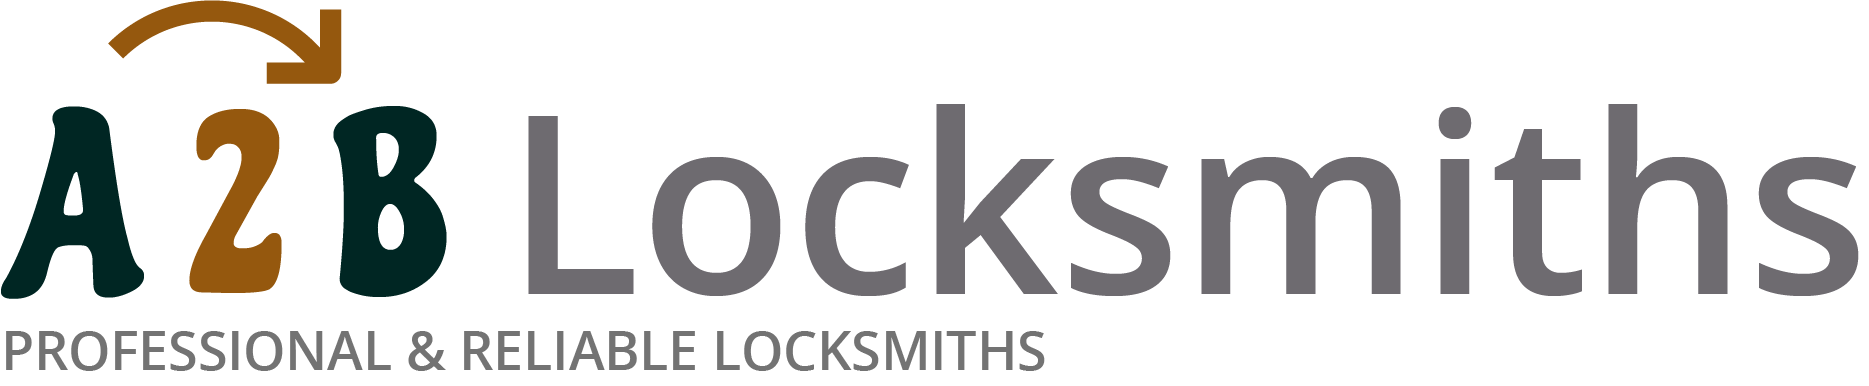 If you are locked out of house in Billingham, our 24/7 local emergency locksmith services can help you.